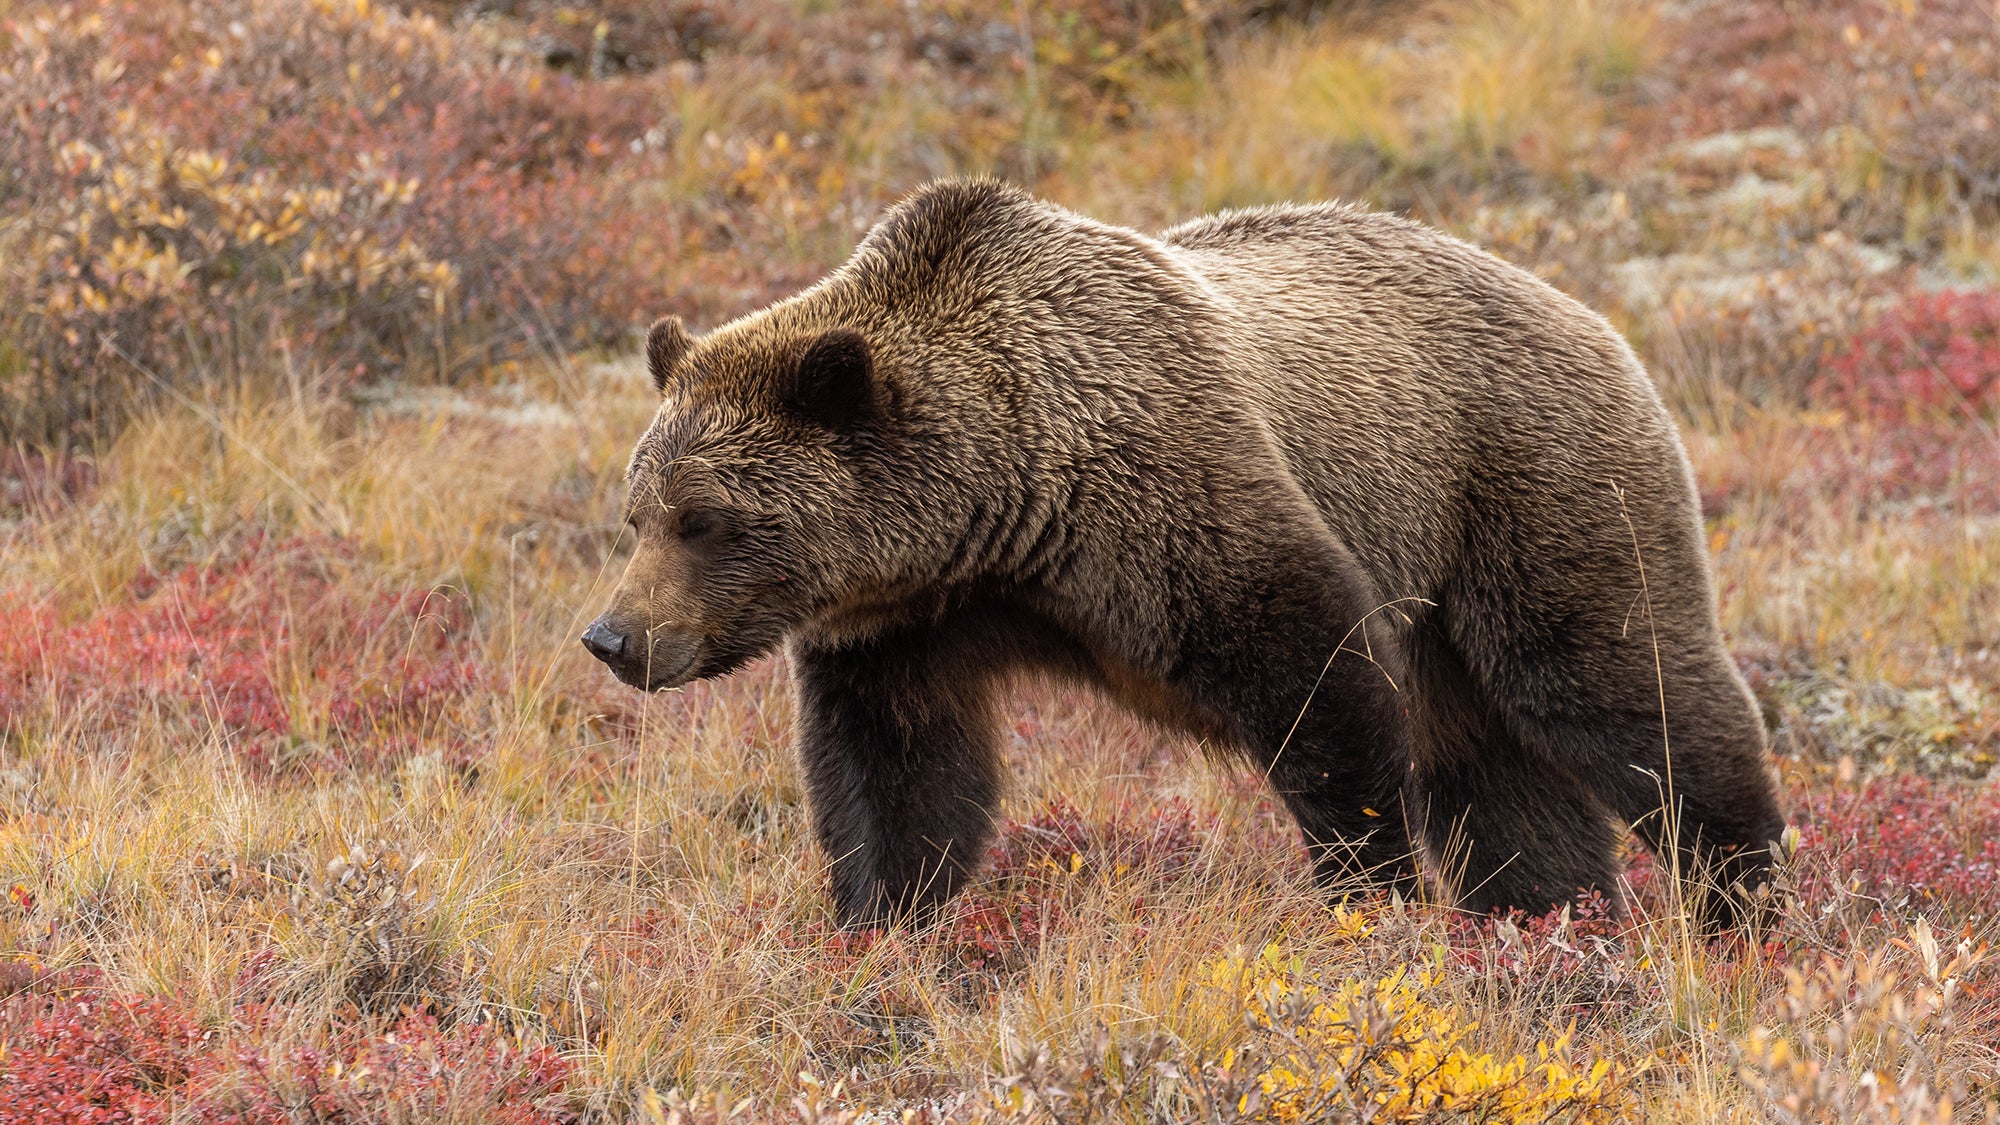 How Much Does a Grizzly Bear Weigh?